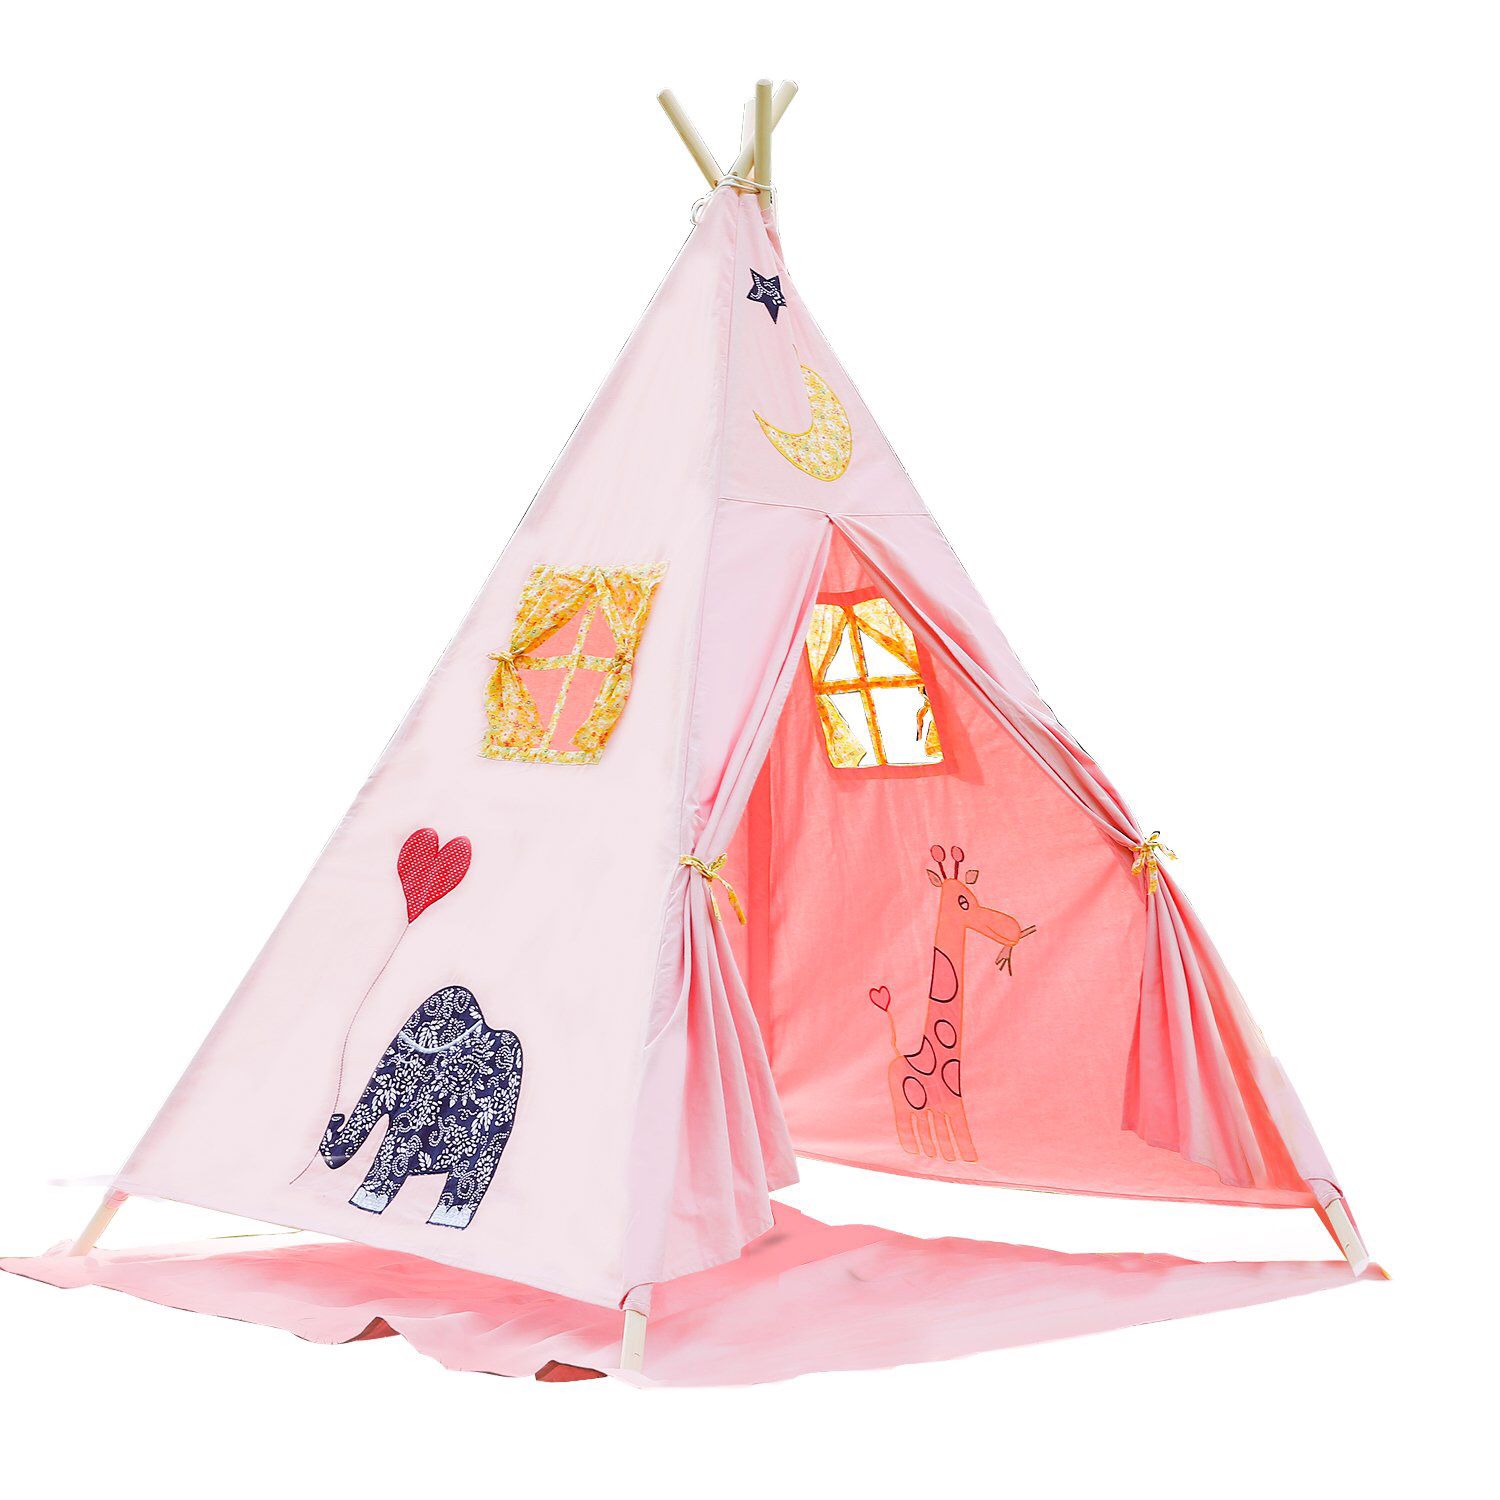 BATTOP Pink Kids Teepee Tent Cotton Canvas. No Pad or storage bag included